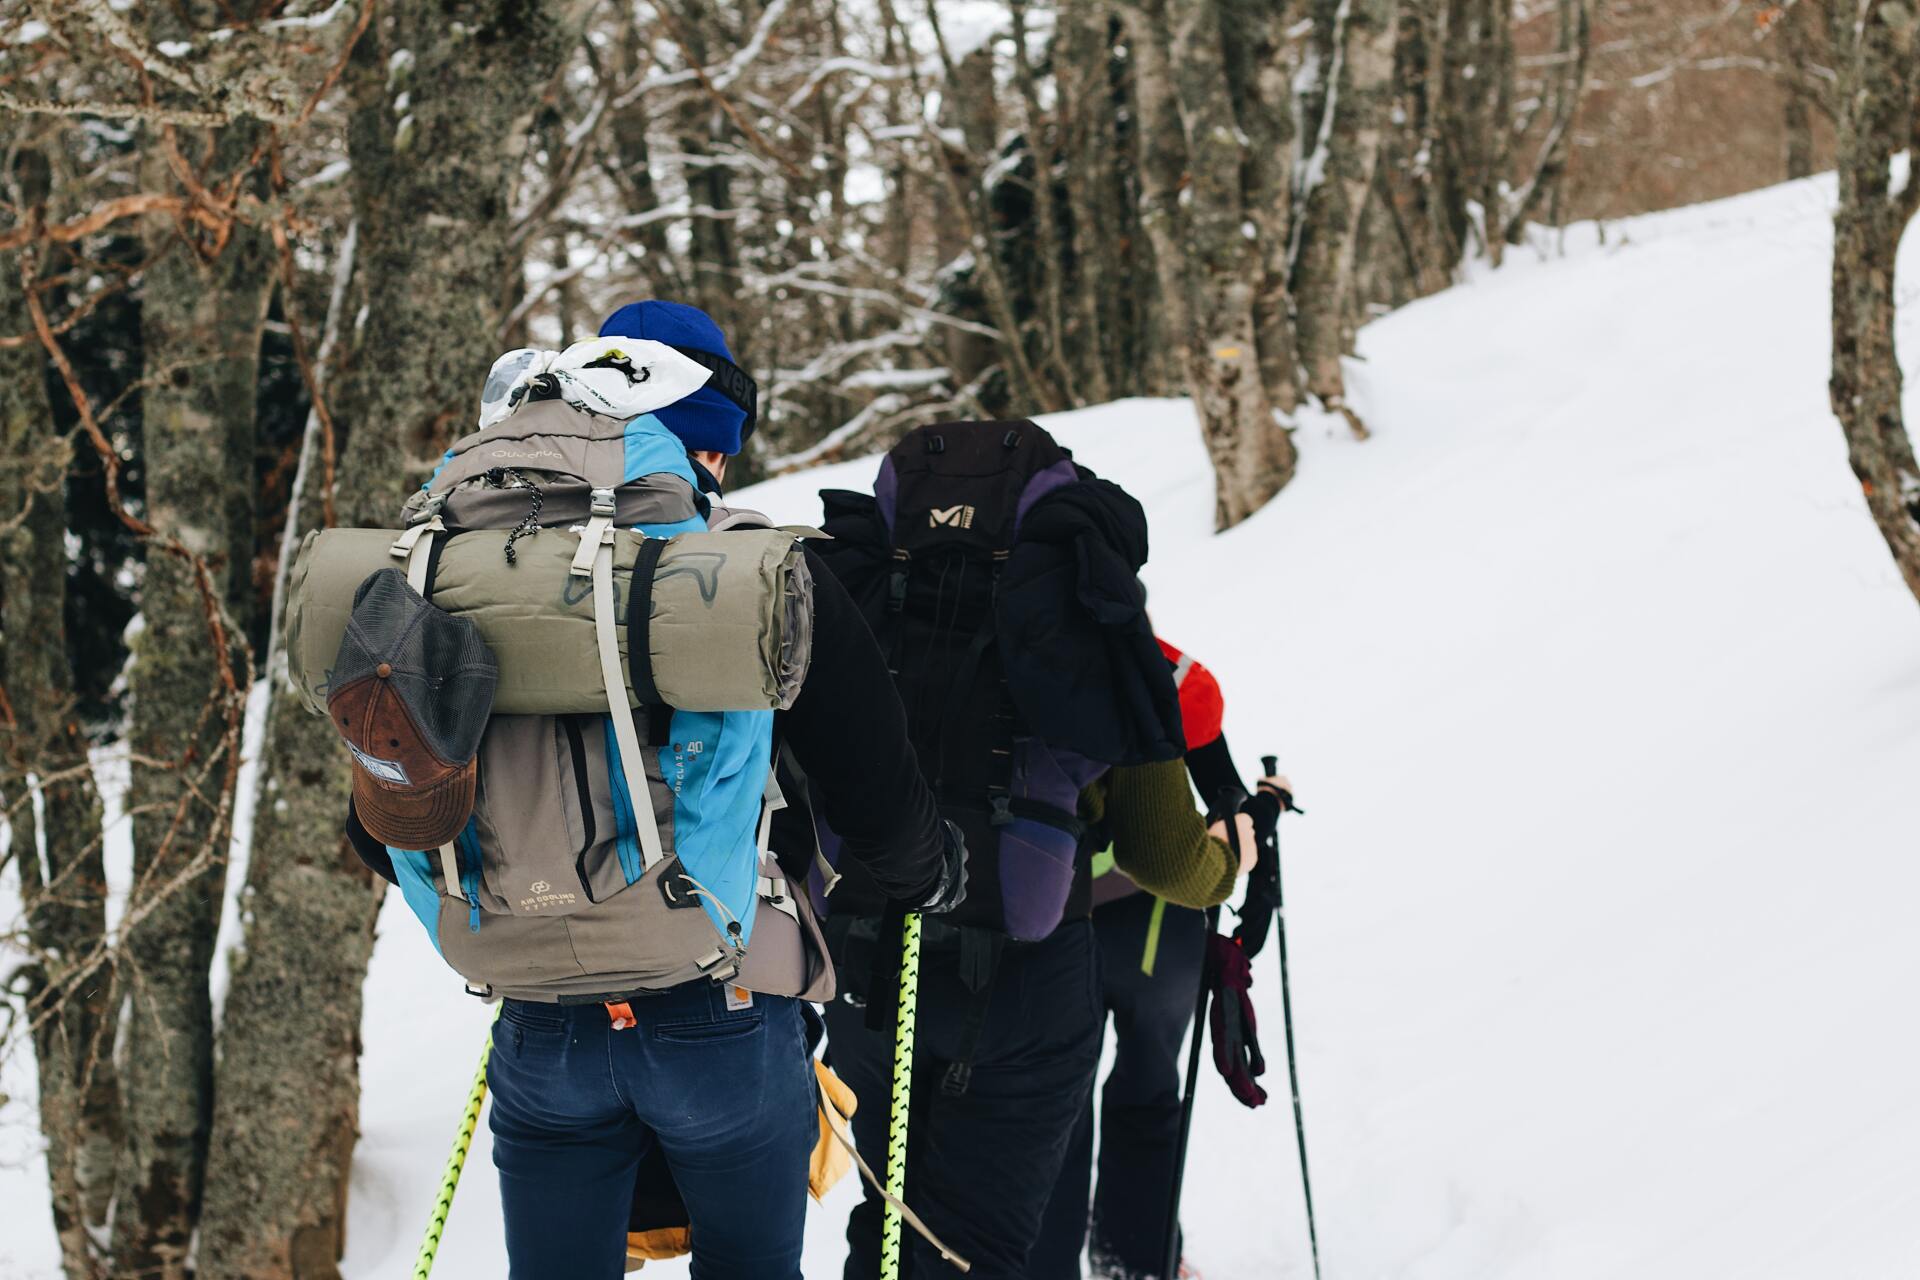 A group of hikers headed up a snow covered trail with hiking poles and packs with adequate winter gear